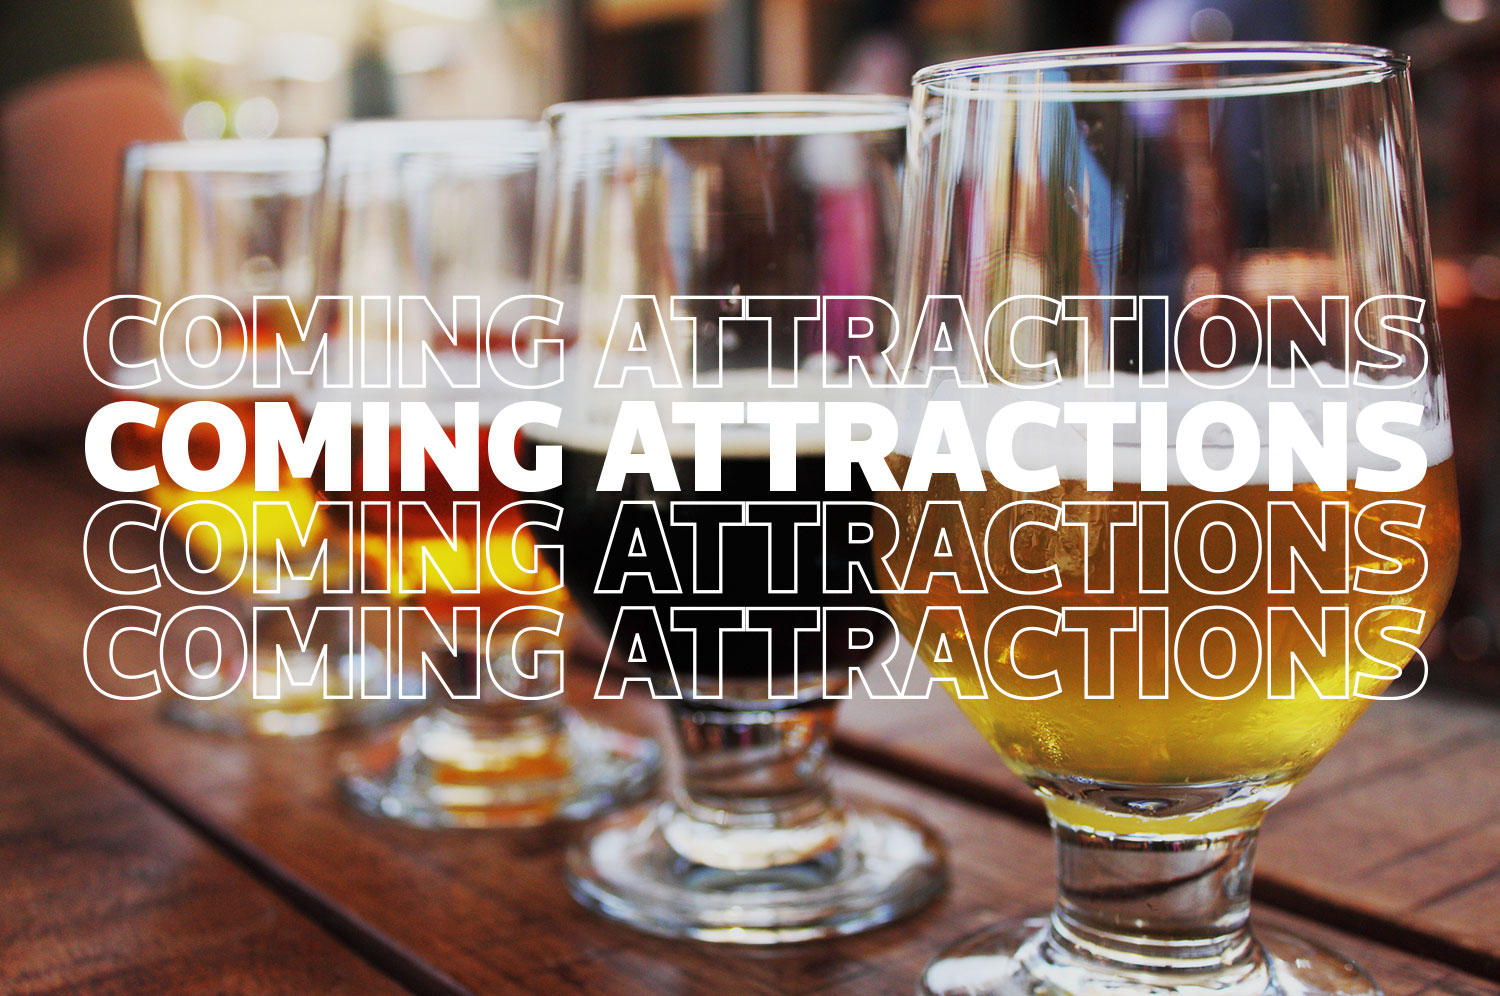 Four glasses of beer under the words “coming attractions”